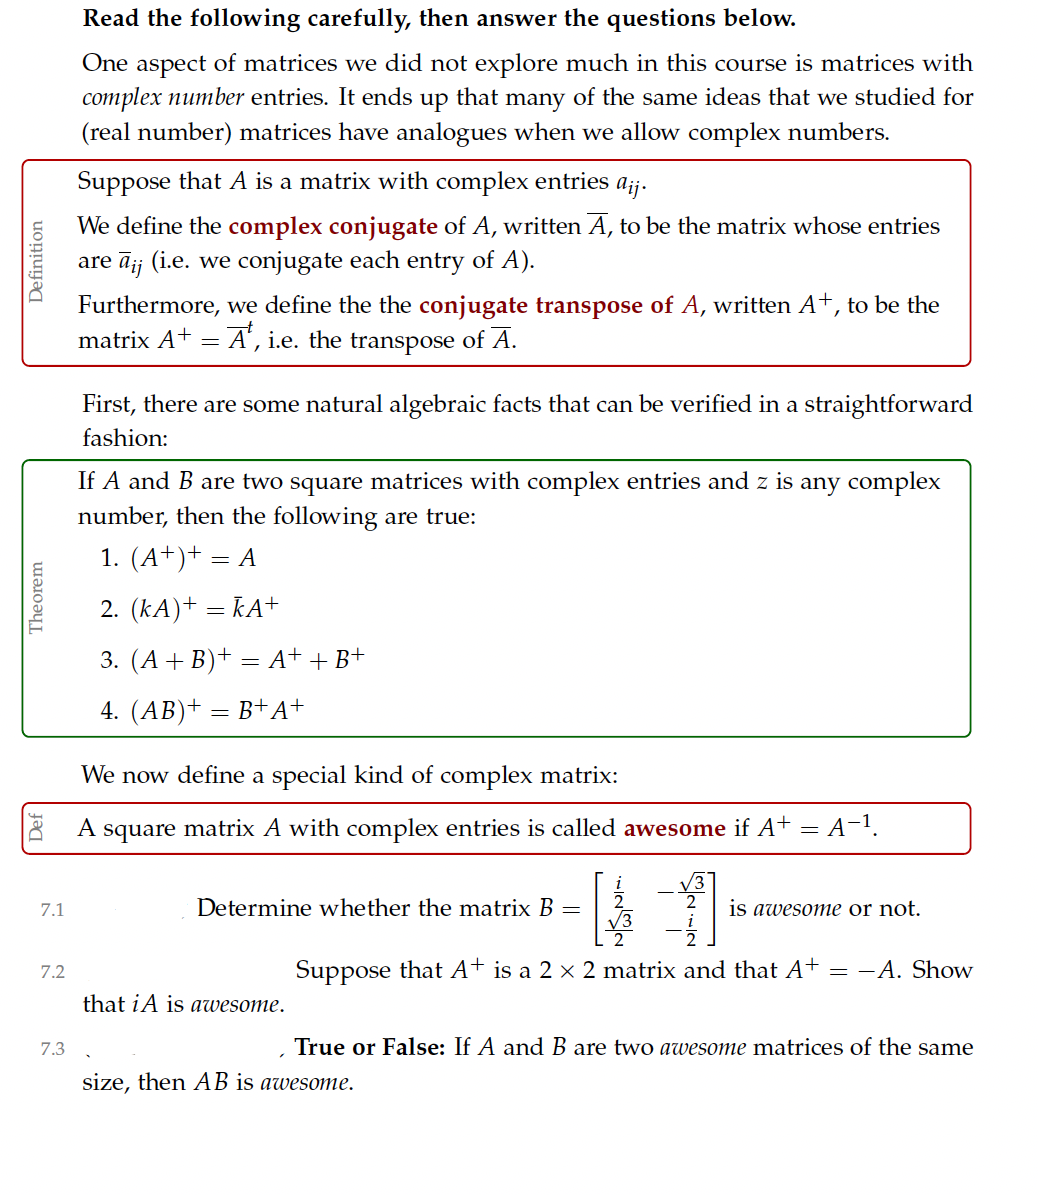 Read the following carefully, then answer the questions below.
One aspect of matrices we did not explore much in this course is matrices with
complex number entries. It ends up that many of the same ideas that we studied for
(real number) matrices have analogues when we allow complex numbers.
Suppose that A is a matrix with complex entries aij.
We define the complex conjugate of A, written A, to be the matrix whose entries
are āj; (i.e. we conjugate each entry of A).
Furthermore, we define the the conjugate transpose of A, written A+, to be the
matrix A+
A', i.e. the transpose of A.
First, there are some natural algebraic facts that can be verified in a straightforward
fashion:
If A and B are two square matrices with complex entries and z is any complex
number, then the following are true:
1. (A+)+ = A
2. (kA)+ = kA+
3. (A + B)+ = A+ + B+
4. (AB)+ = B+A+
We now define a special kind of complex matrix:
A square matrix A with complex entries is called awesome if A+
= A-1
7.1
Determine whether the matrix B =
is awesome or not.
Suppose that A+ is a 2 x 2 matrix and that A+
-A. Show
7.2
that iA is awesome.
7.3
True or False: If A and B are two awesome matrices of the same
size, then AB is awesome.
Theorem
Definition
